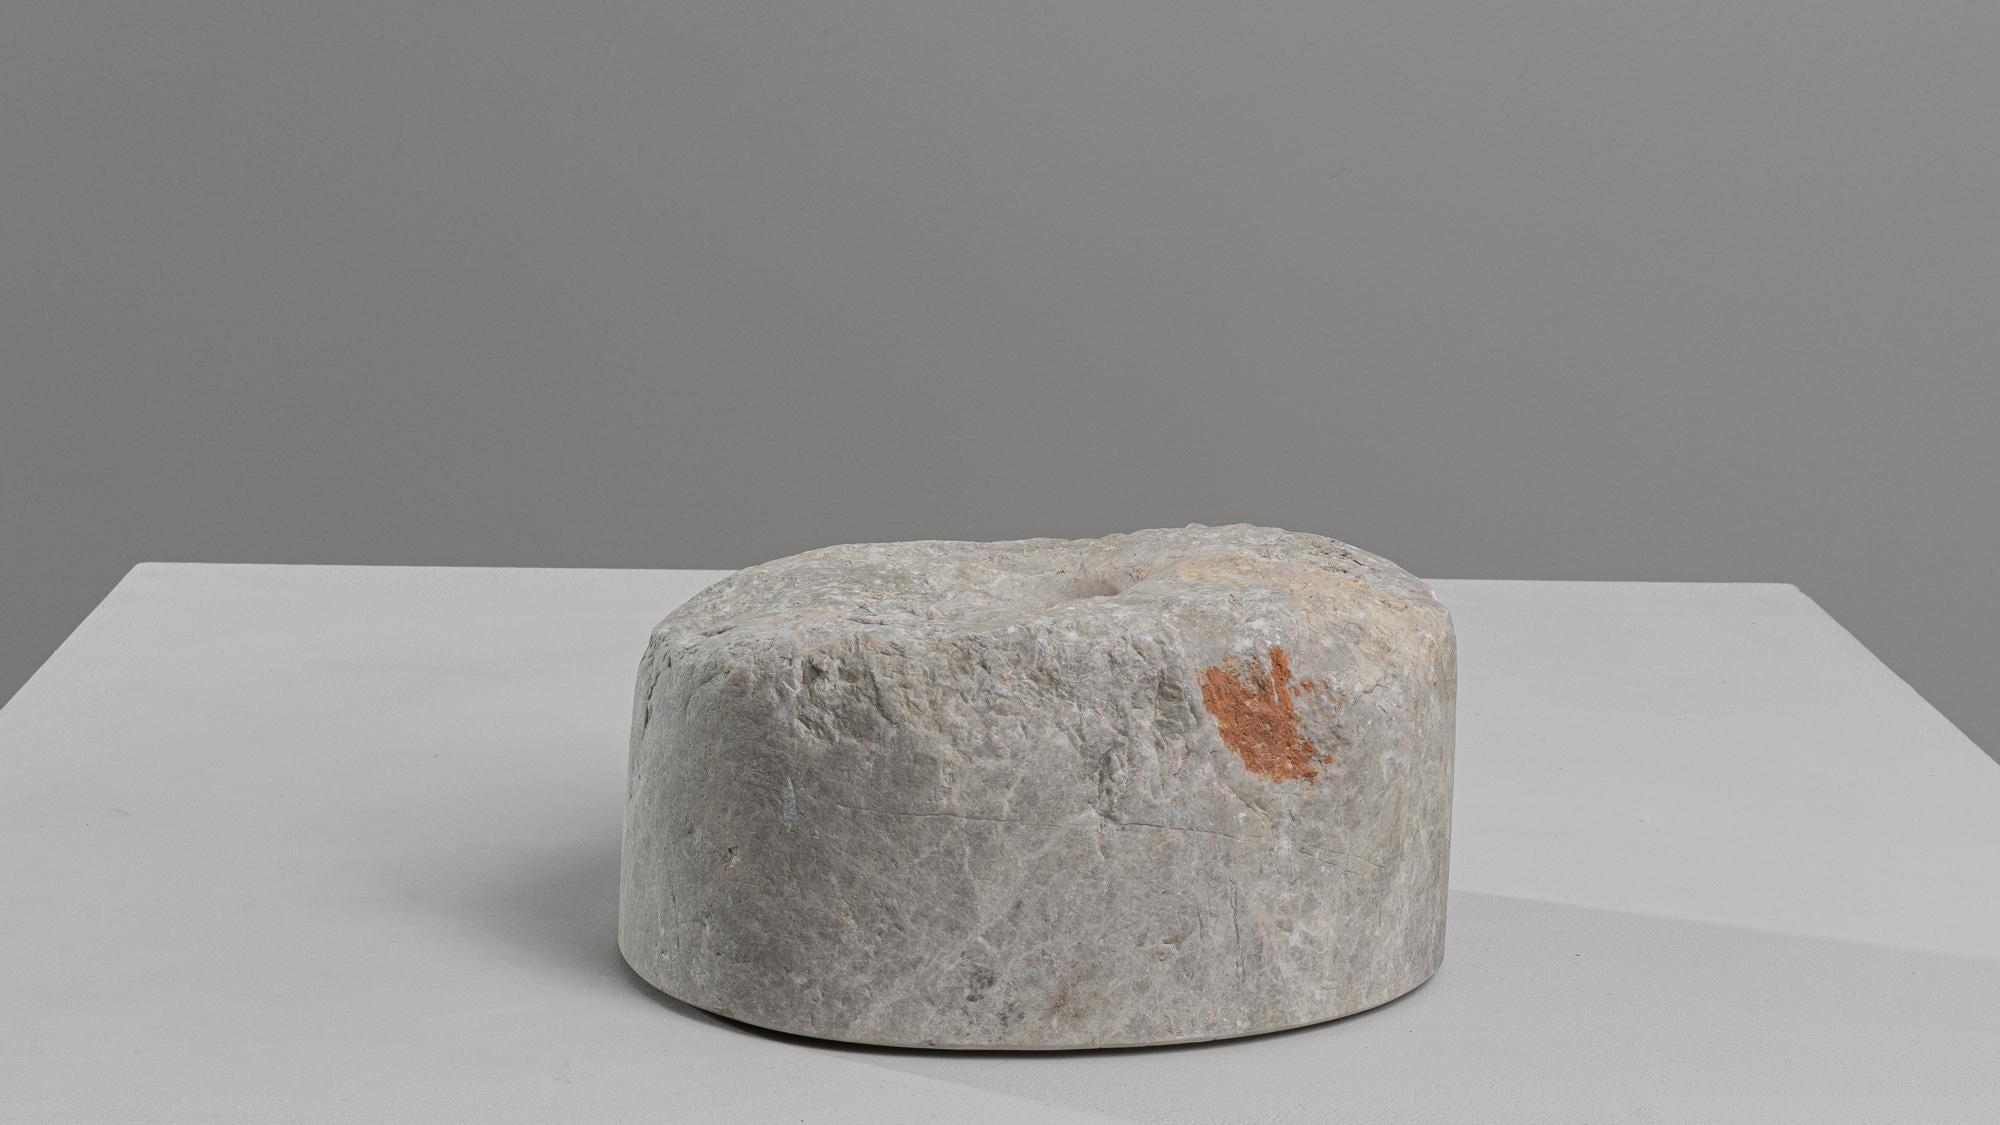 This stunning 19th Century European Marble Mortar is a true relic of culinary history, now poised to serve as a sophisticated decorative element in your home. Crafted from a solid piece of marble, this mortar showcases natural gray veining and a